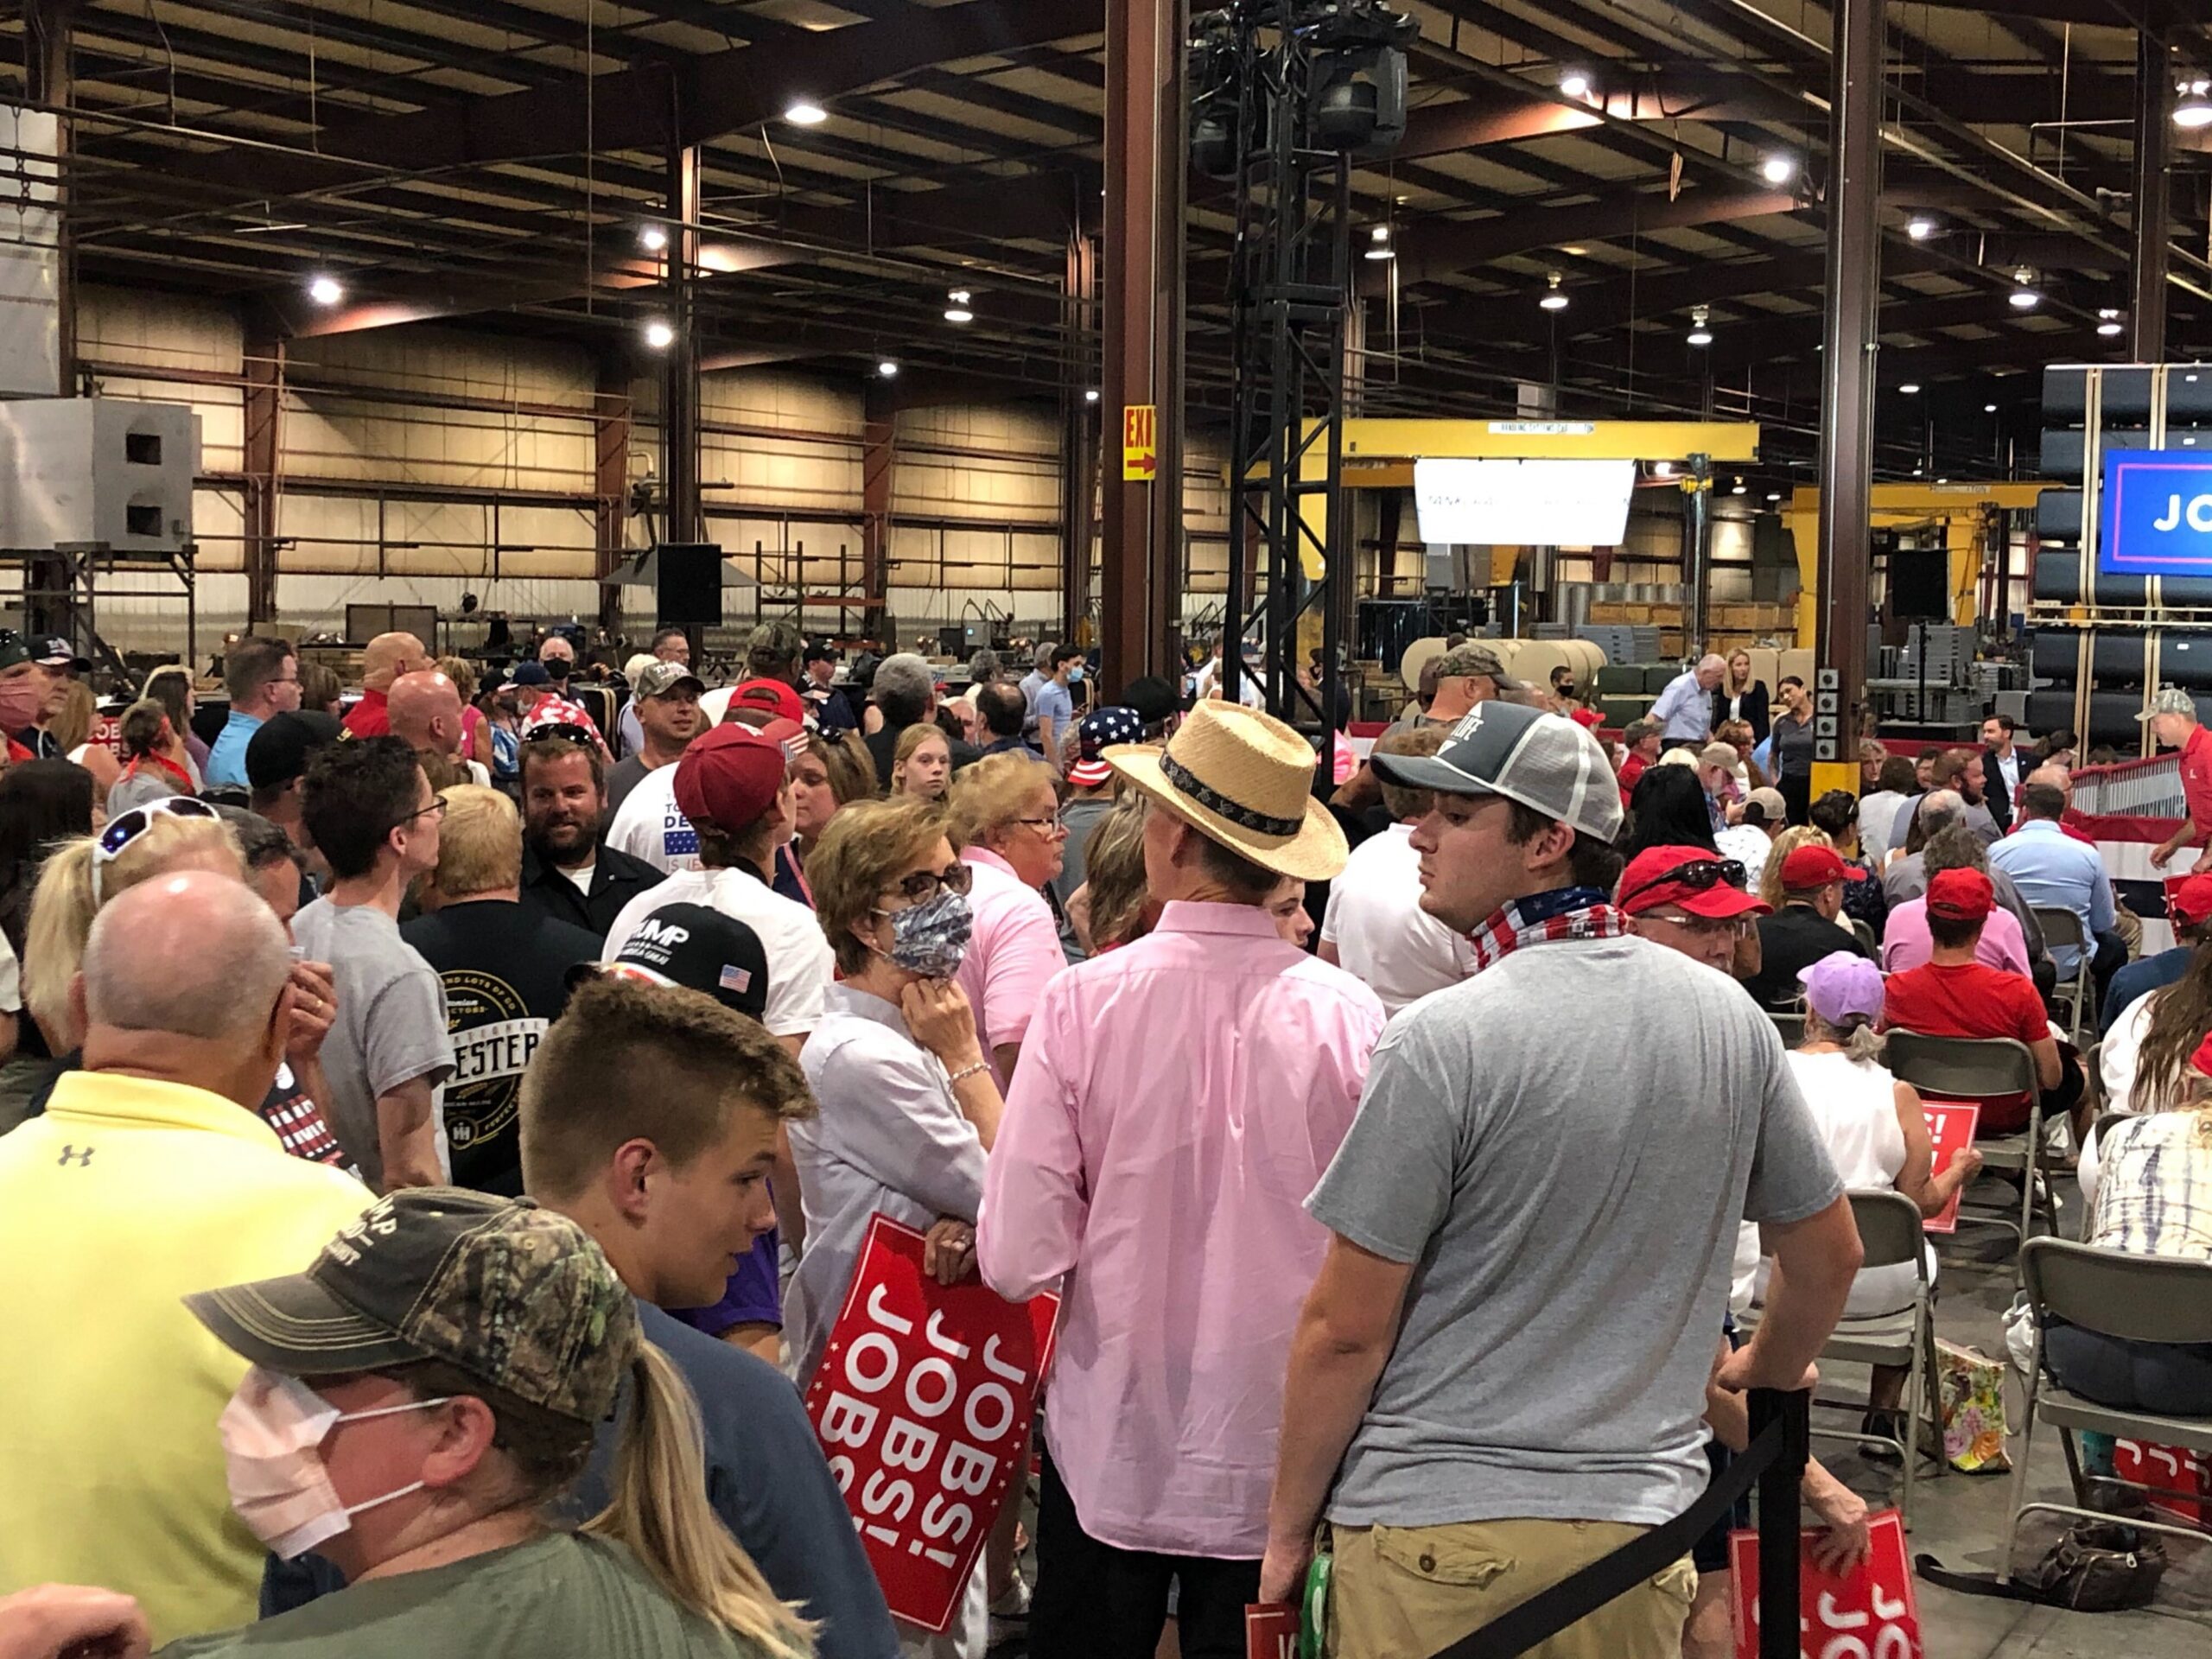 Crowd at Mike Pence rally